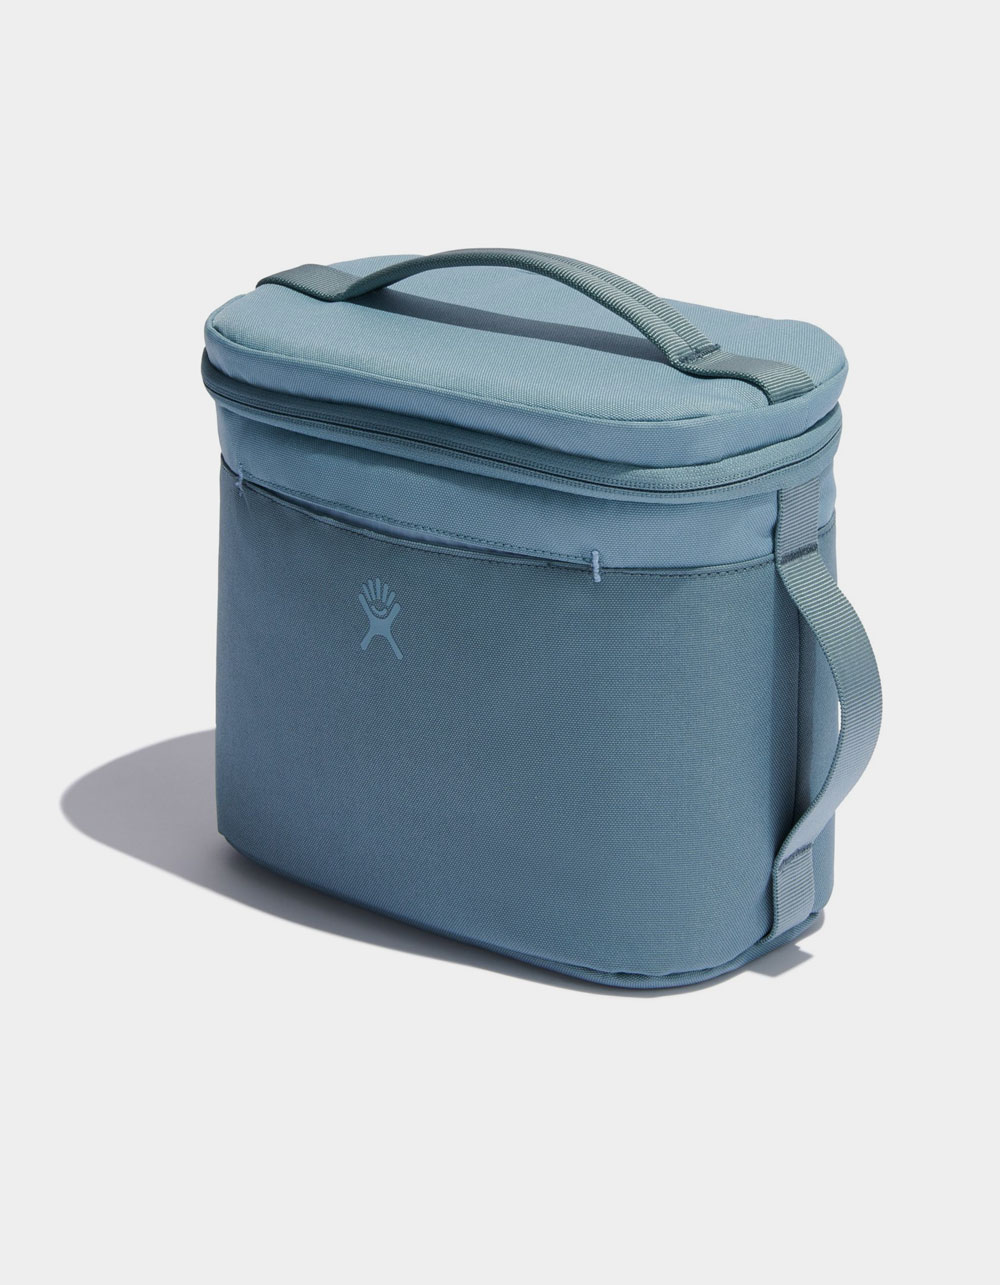 Hydro Flask on X: Yes #HydroFlask makes more than quality water bottles.  This lunch box has a storage capacity of 3.5 liters & includes layers of  insulation to keep your food cold